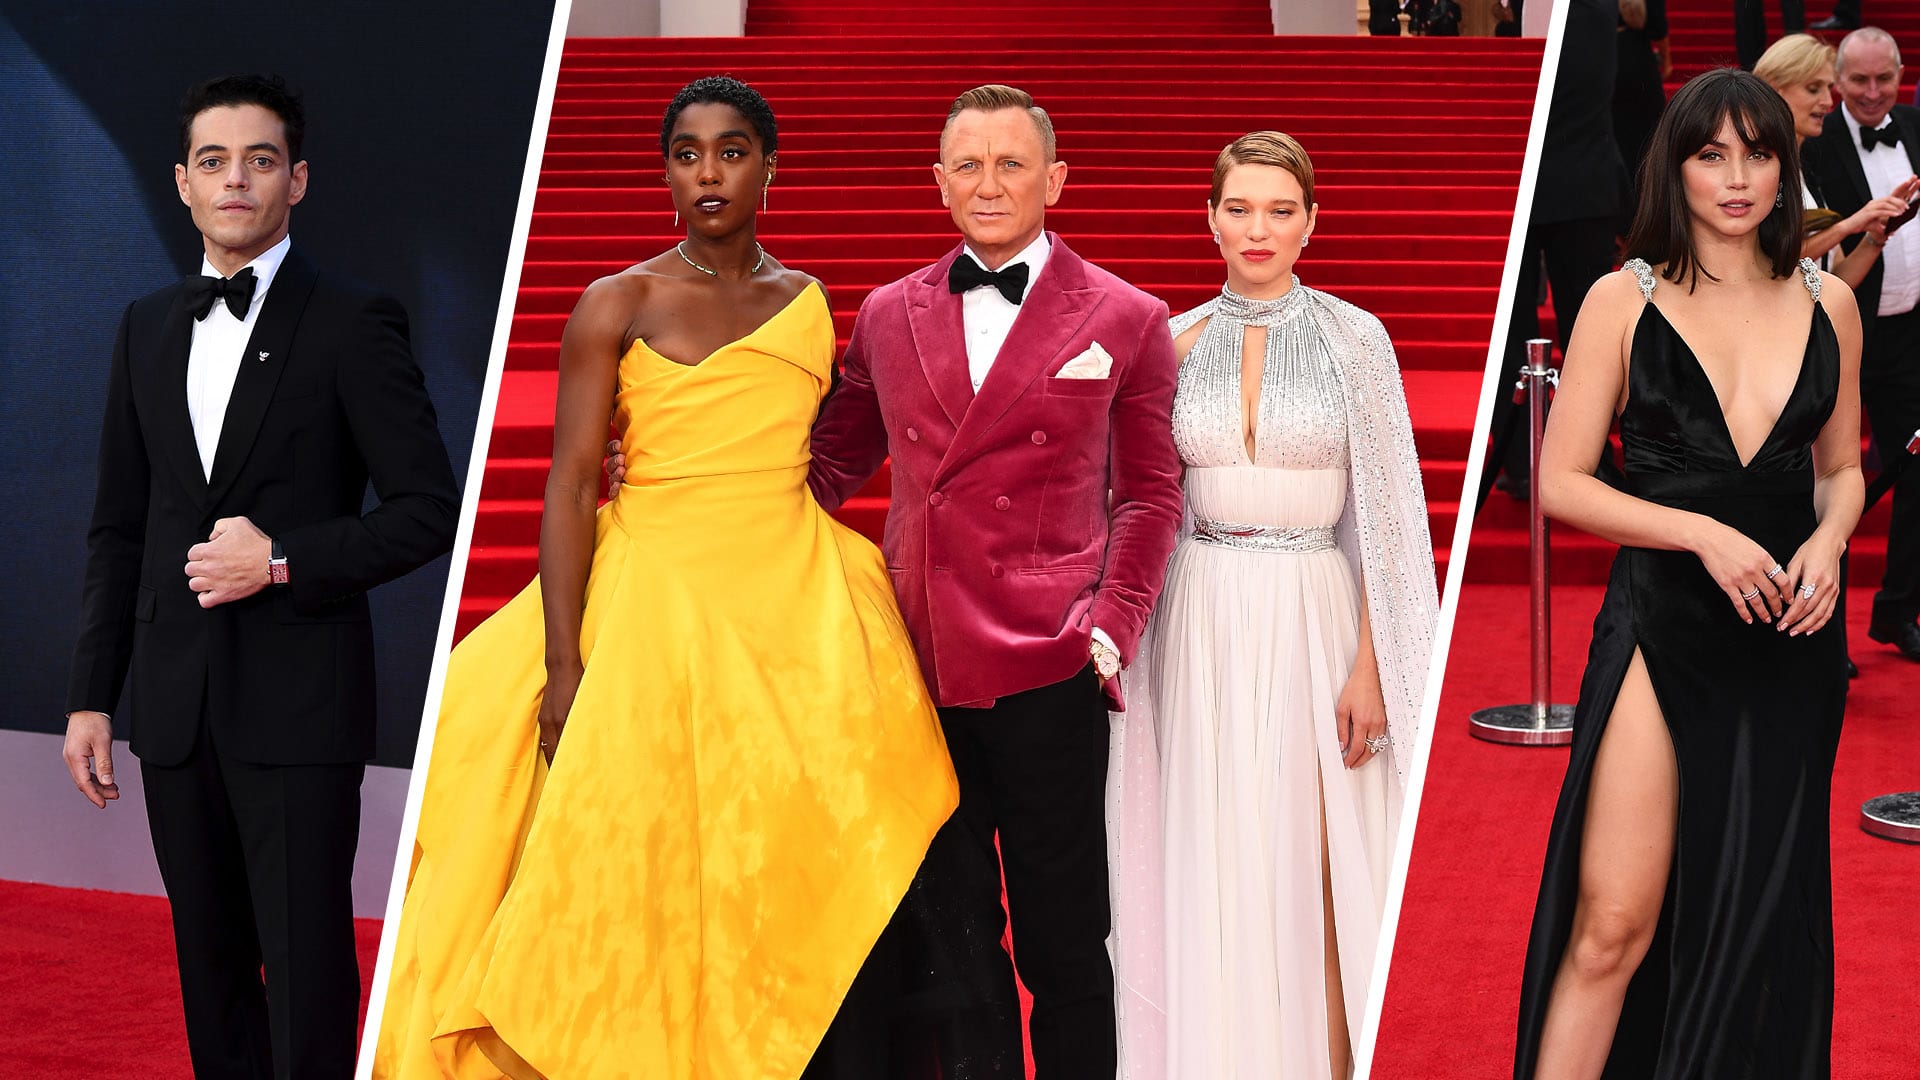 Dressed To Thrill: Check Out What Daniel Craig, Rami Malek, Léa Seydoux Wore At The No Time To Die World Premiere In London